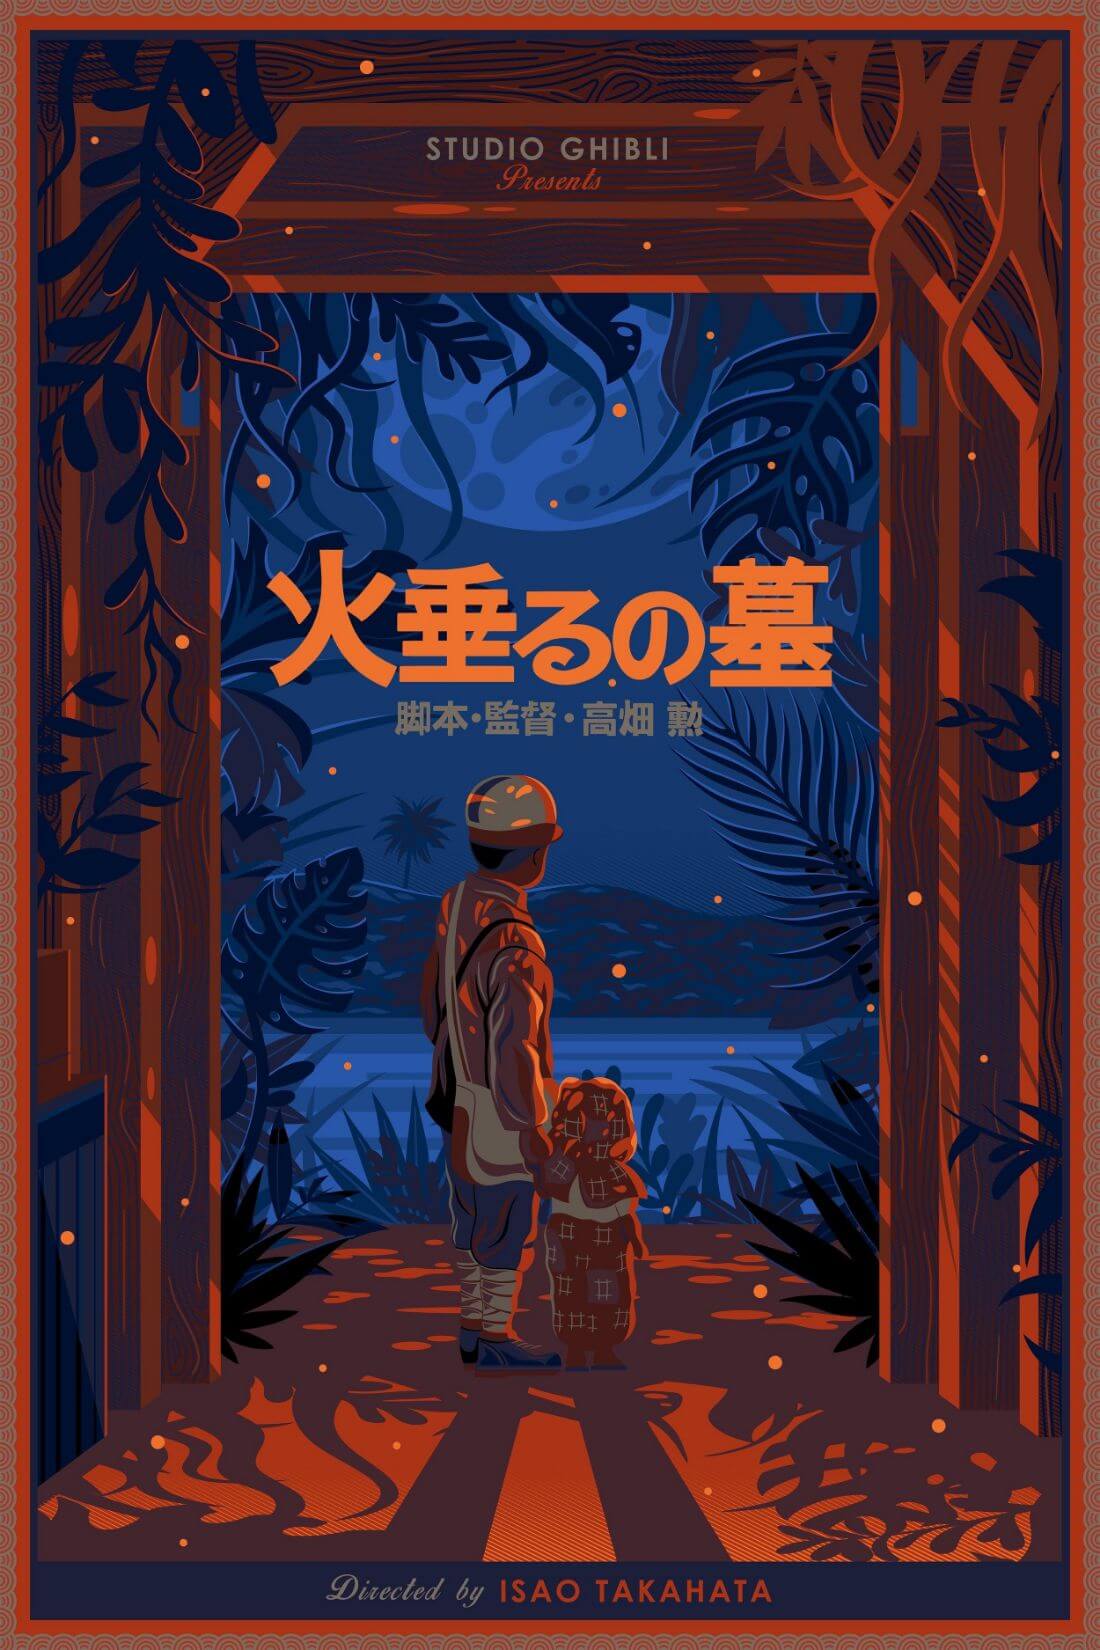 Japanese Animation War Poster Grave of Fireflies Decorative Painting Canvas  Wall Art Living Room Bedroom Painting 20x30cm